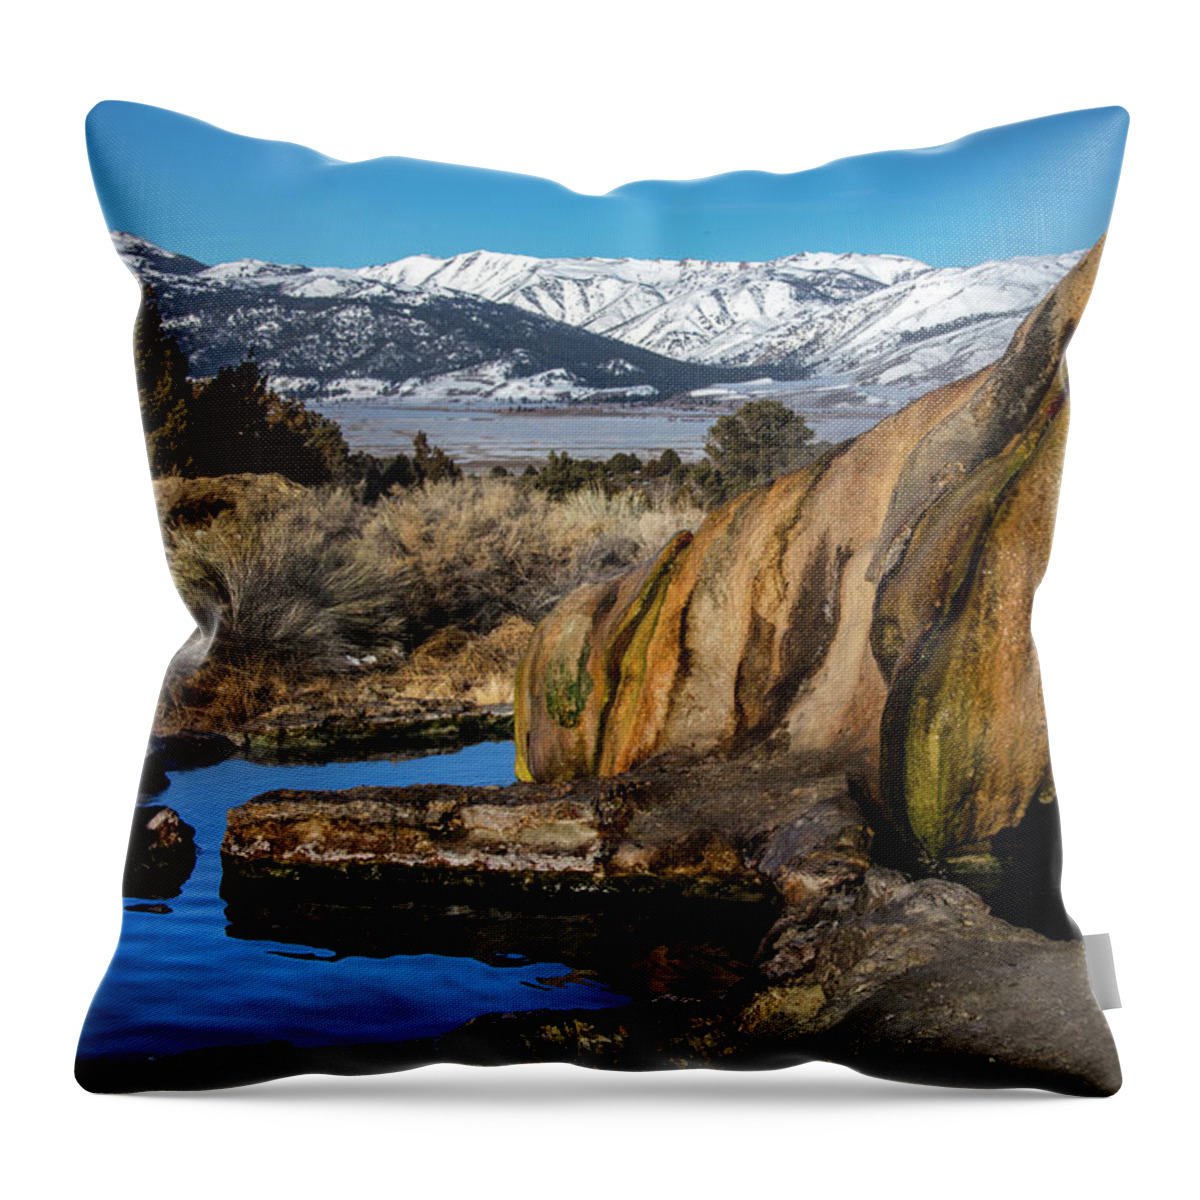  Throw Pillow featuring the photograph Travertine hot spring by John T Humphrey